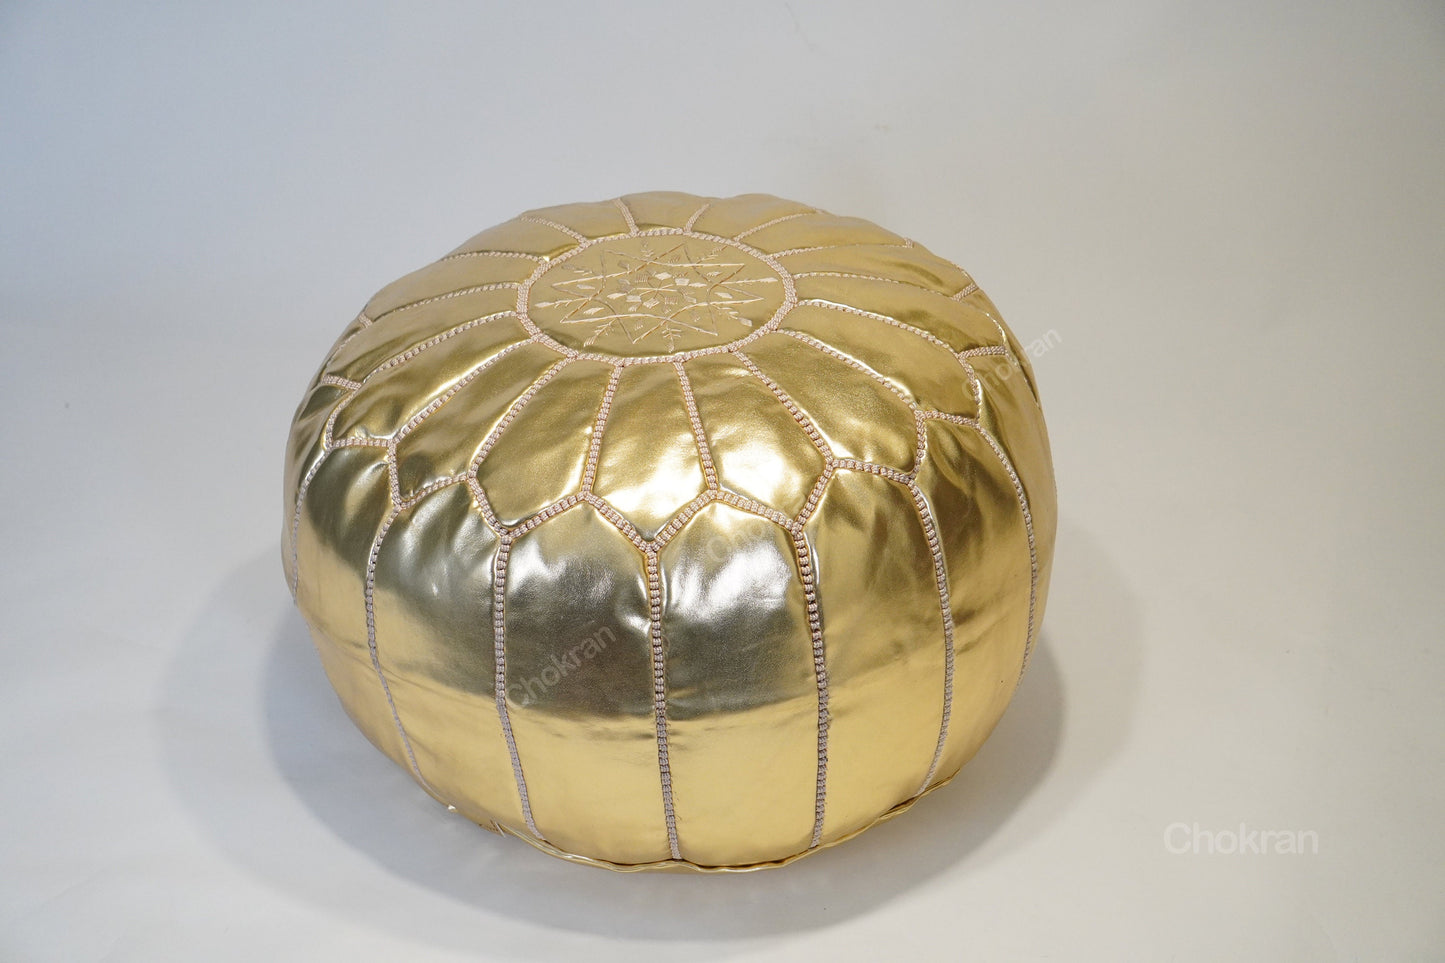 GOLD Moroccan leather pouf, round leather ottoman, handmade leather pouf, Moroccan genuine leather footstool- Dark brown -UNSTUFFED